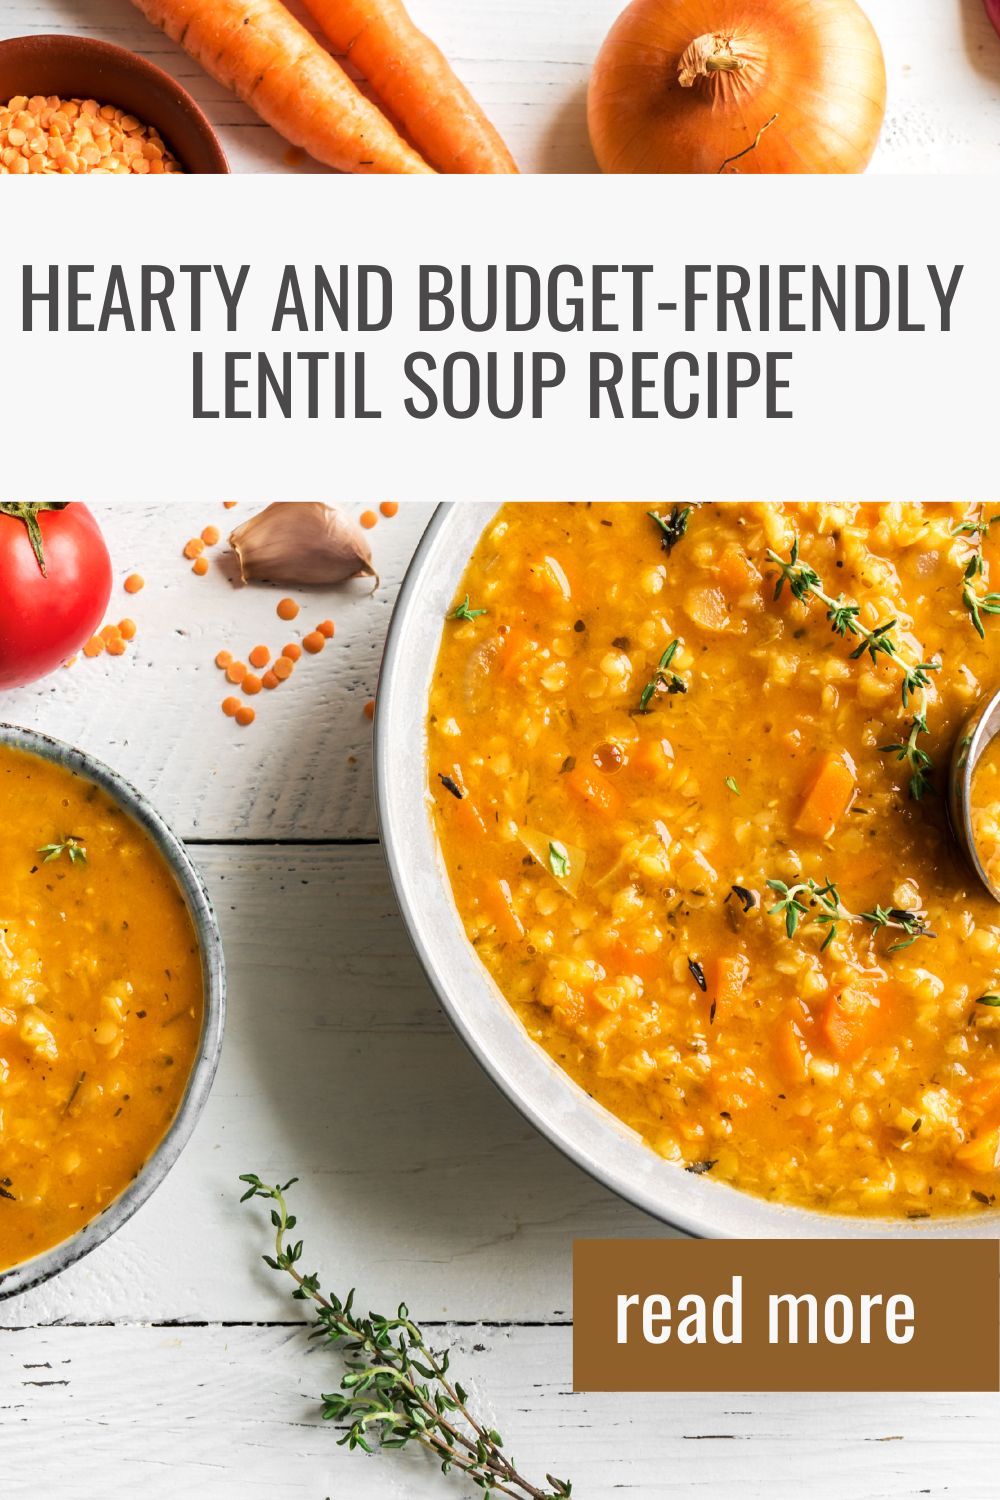 Looking for a delicious and budget-friendly meal that can be enjoyed by the whole family? Look no further than this hearty and budget-friendly lentil soup recipe! Made with simple ingredients.